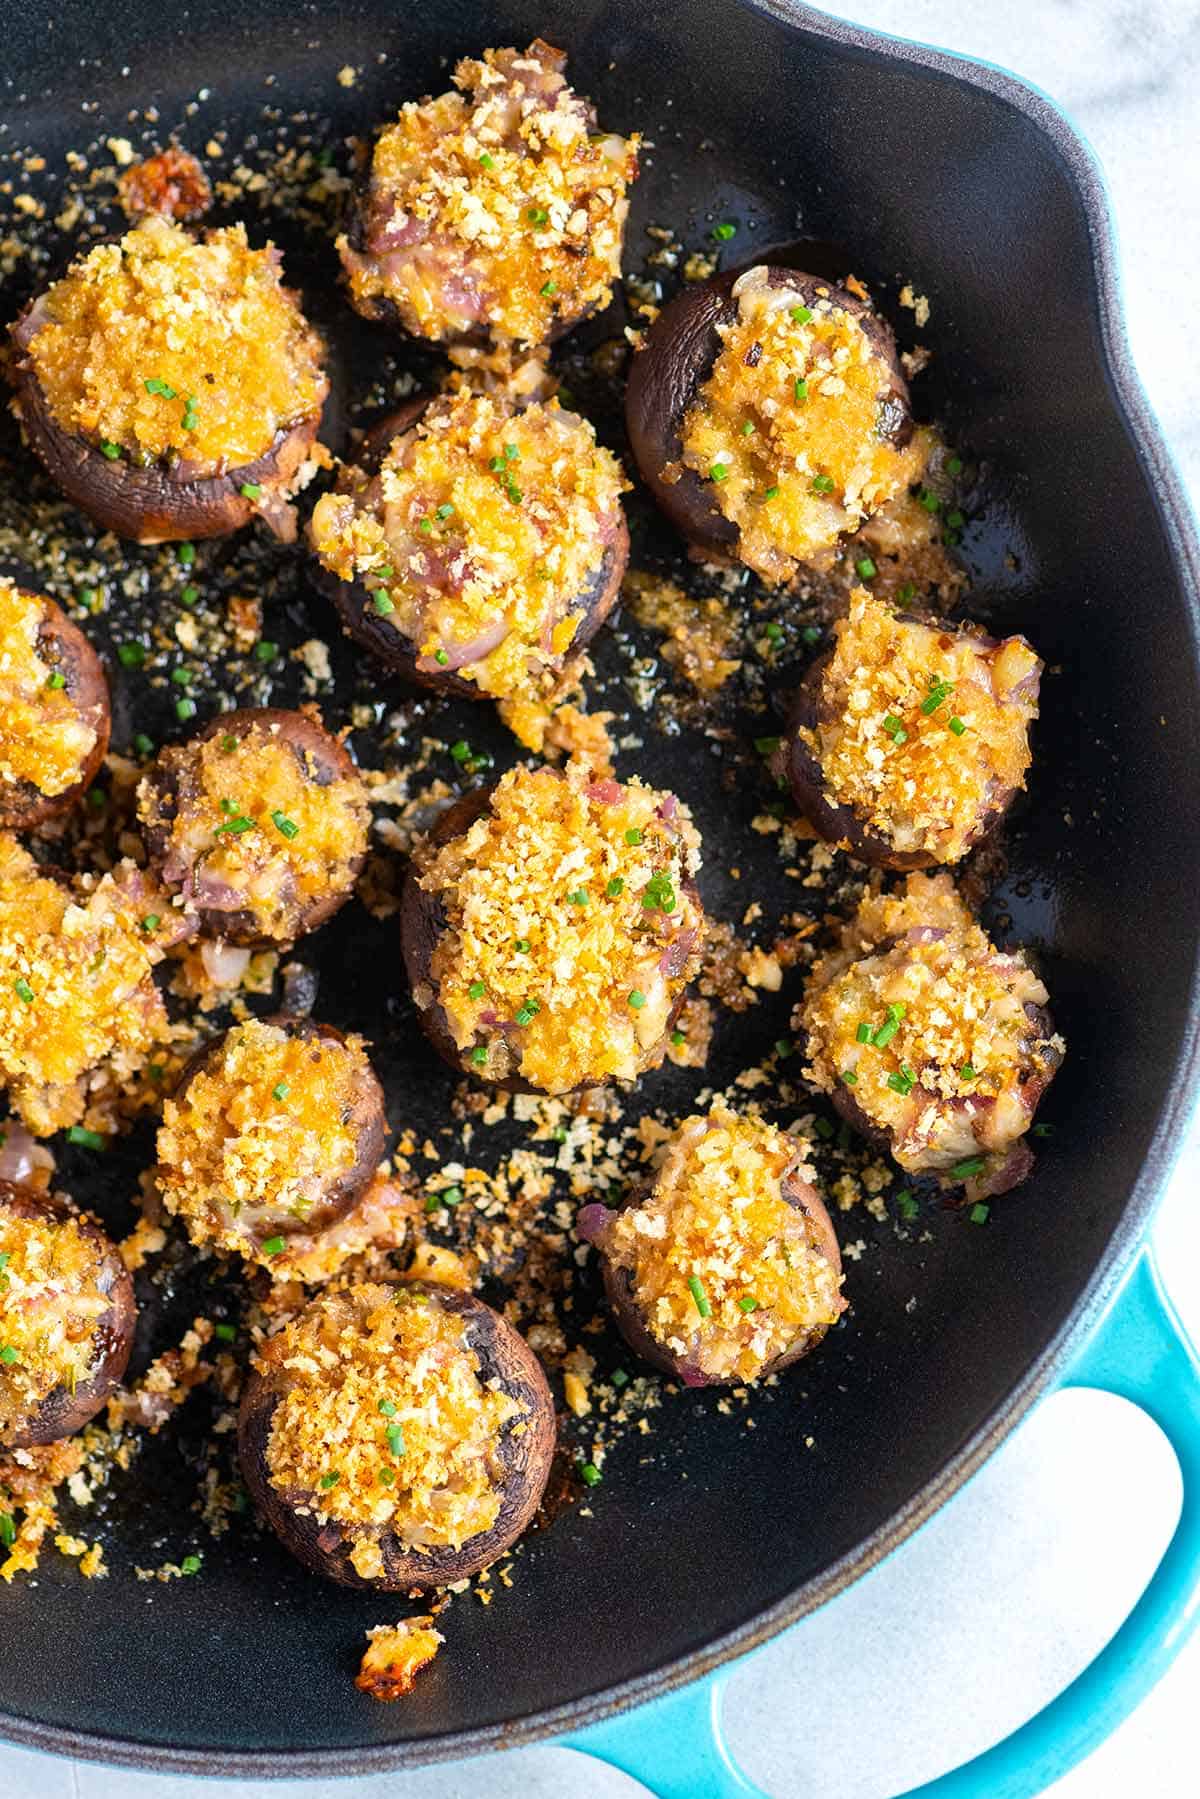 Best Stuffed Mushrooms with Cheese and Garlic